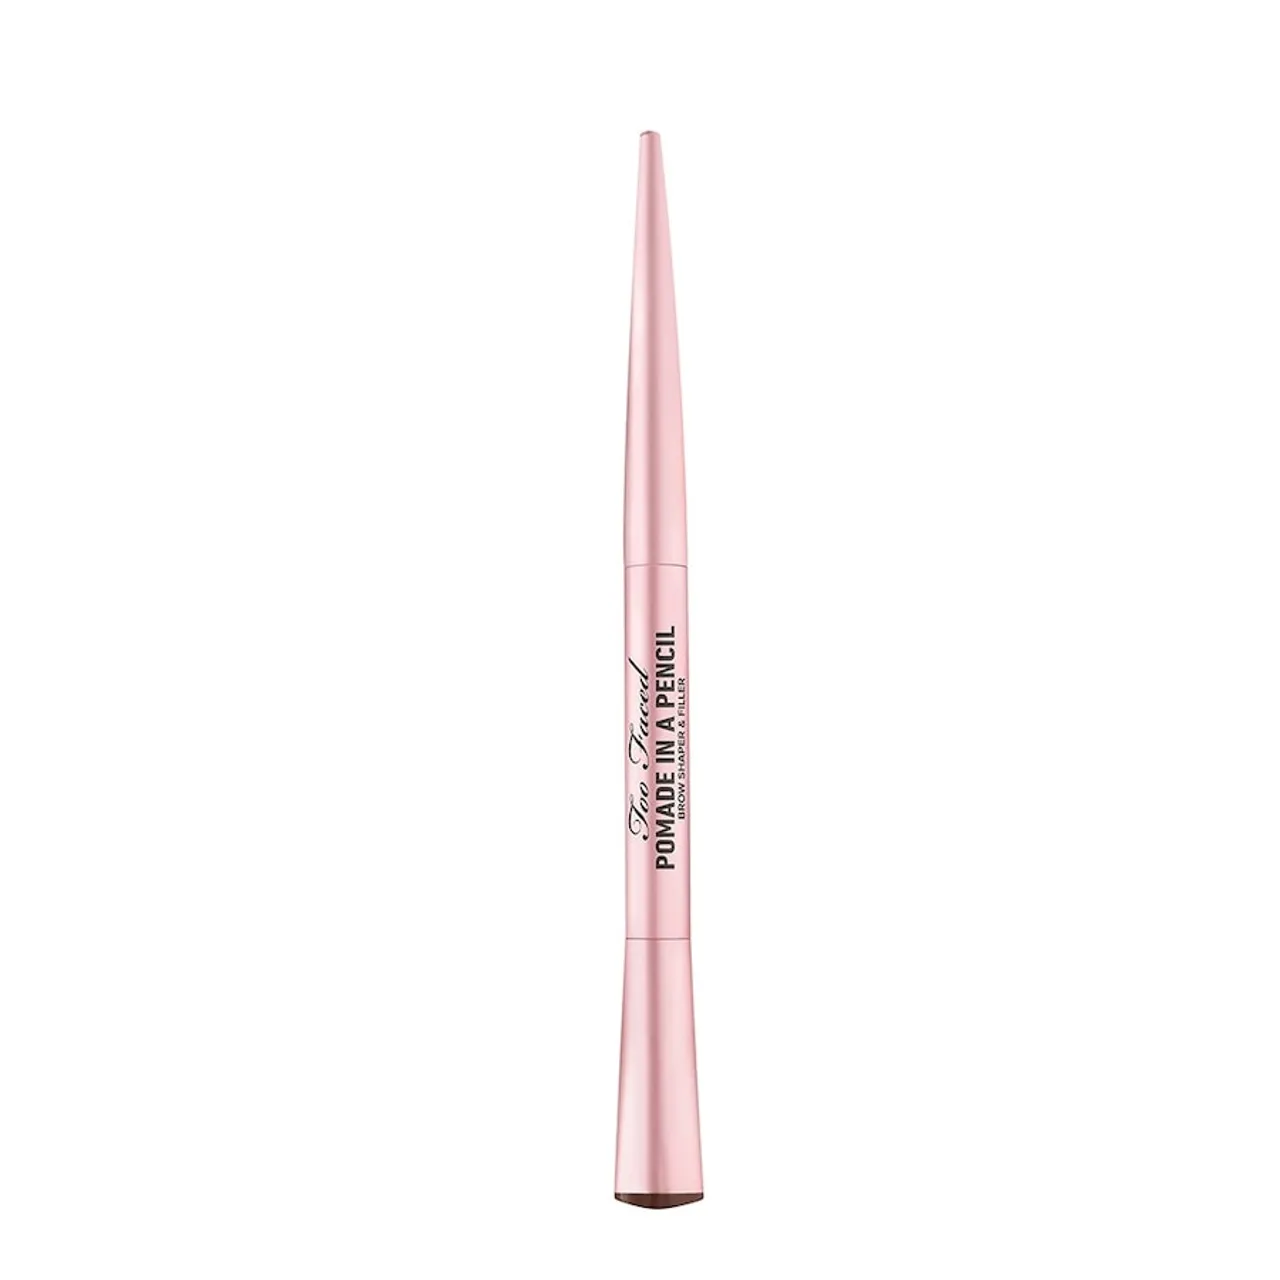 Too Faced - Brows Pomade In A Pencil Augenbrauengel 0.19 g ESPRESSO